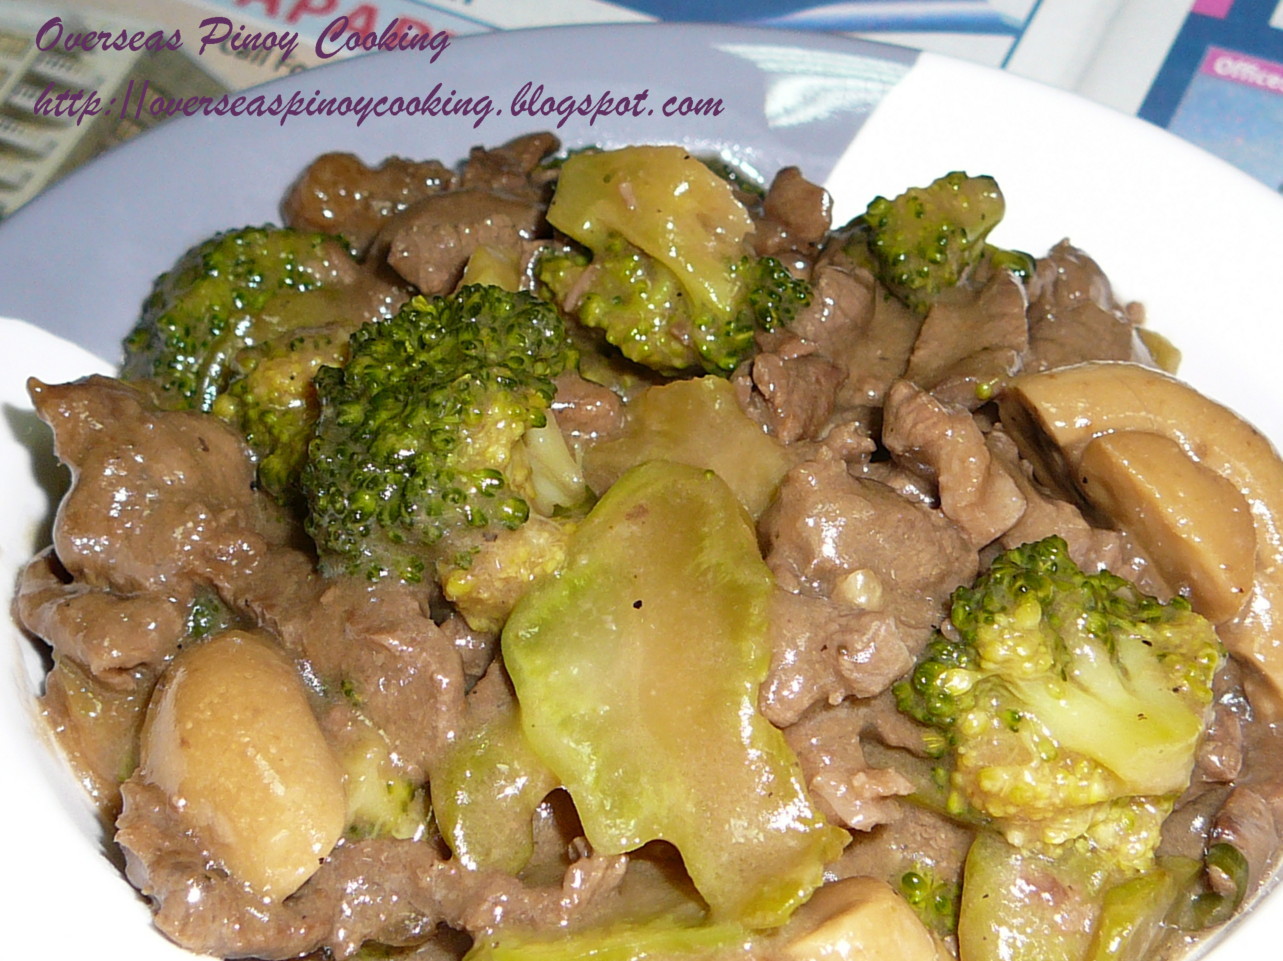 Beef Broccoli with Oyster Sauce